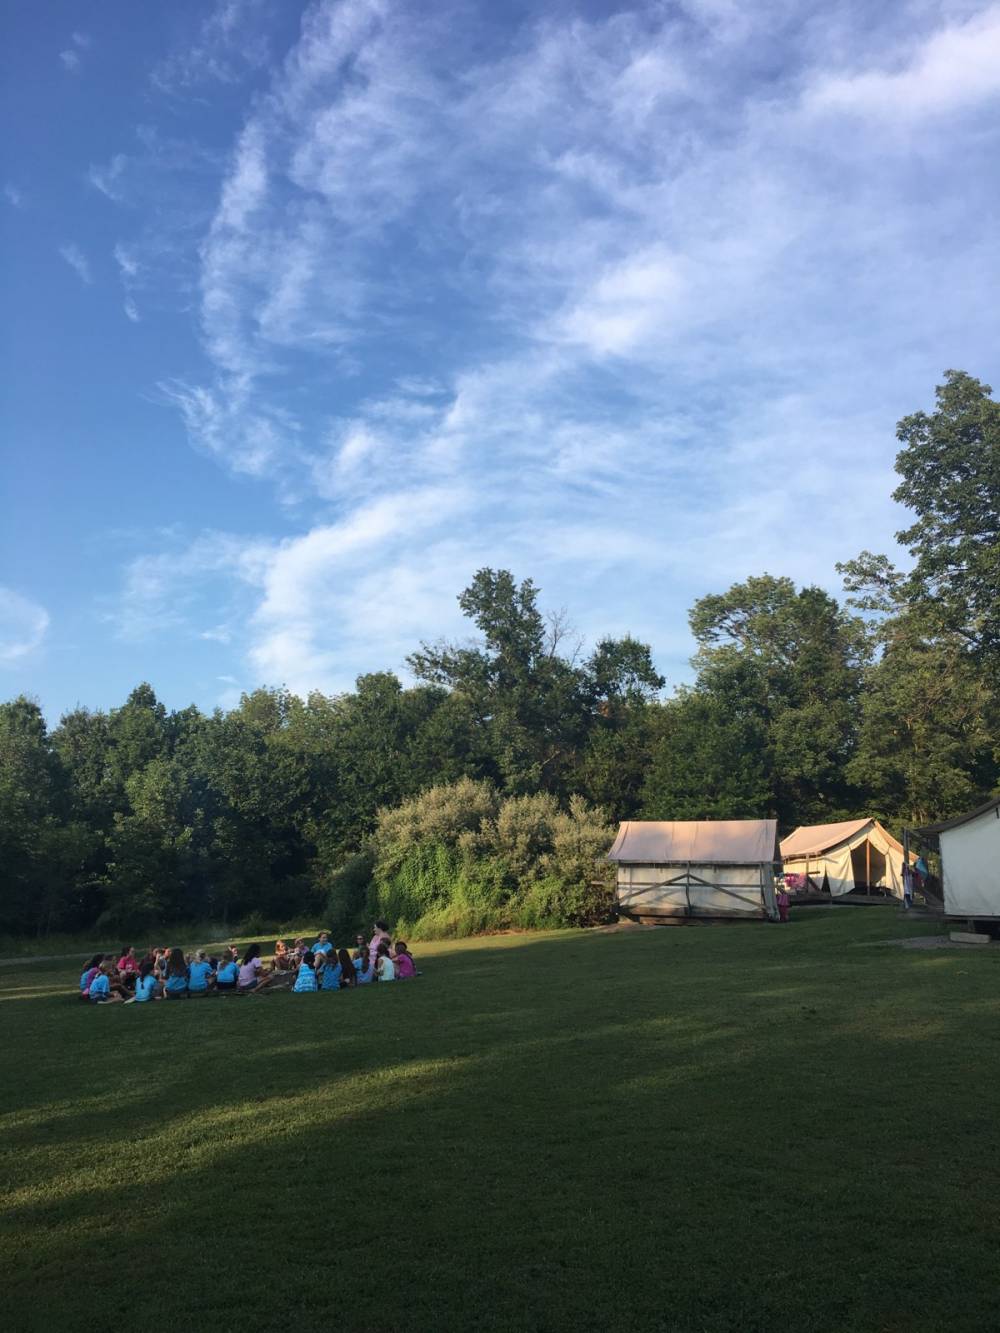 TOP NEW JERSEY HORSE RIDING CAMP: Camp Agnes DeWitt is a Top Horse Riding Summer Camp located in Hillsborough New Jersey offering many fun and enriching Horse Riding and other camp programs. Camp Agnes DeWitt also offers CIT/LIT and/or Teen Leadership Opportunities, too.